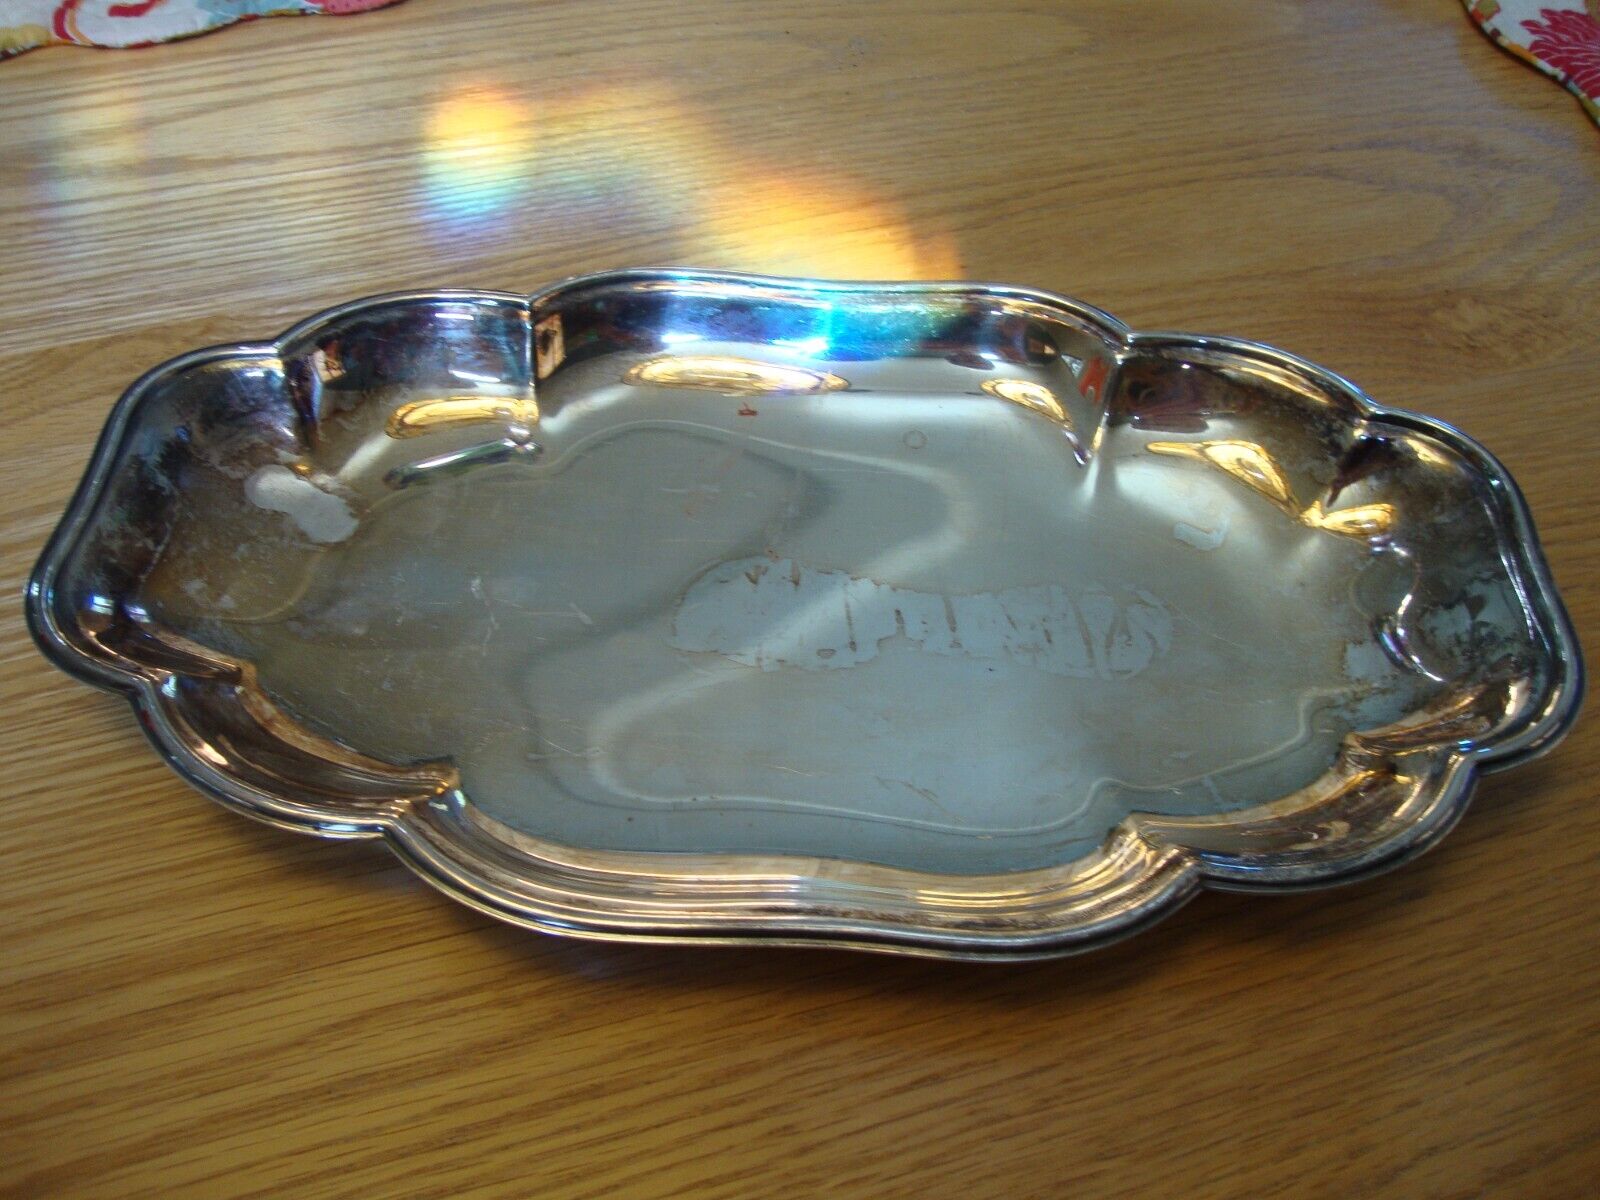 VINTAGE GORHAM SILVER PLATE SERVING BREAD TRAY HERITAGE YH10 12" X 7" OBLONG MCM